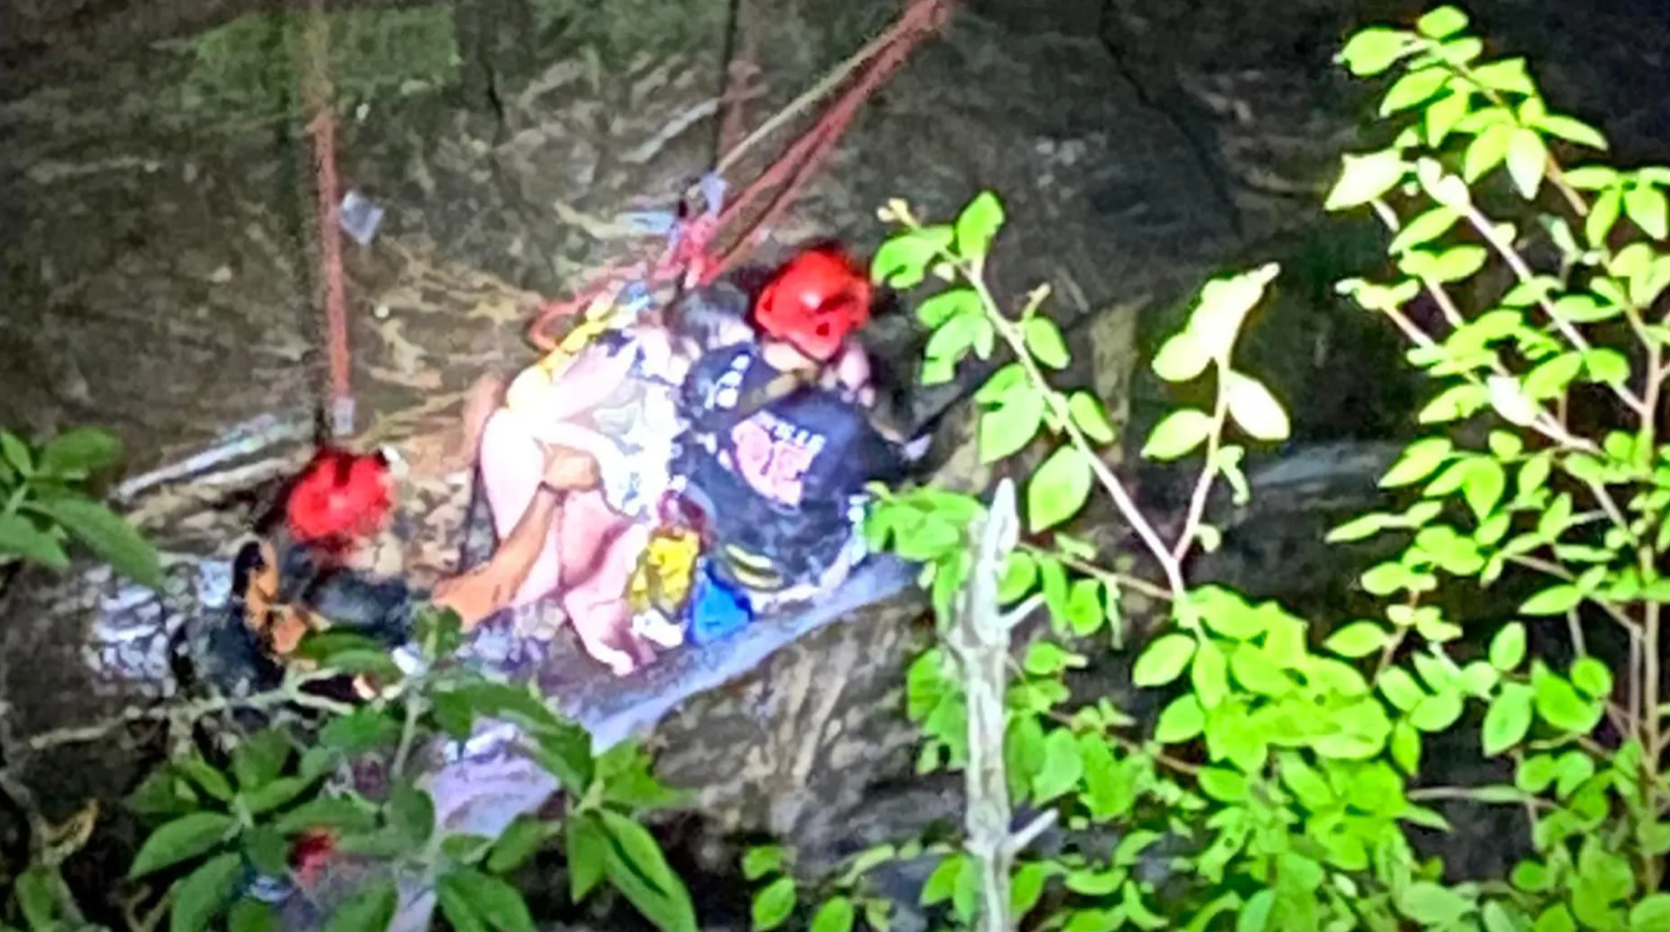 Rescuers from 18 separate agencies worked for hours to free a teenage hiker who had fallen 15m from a cliff